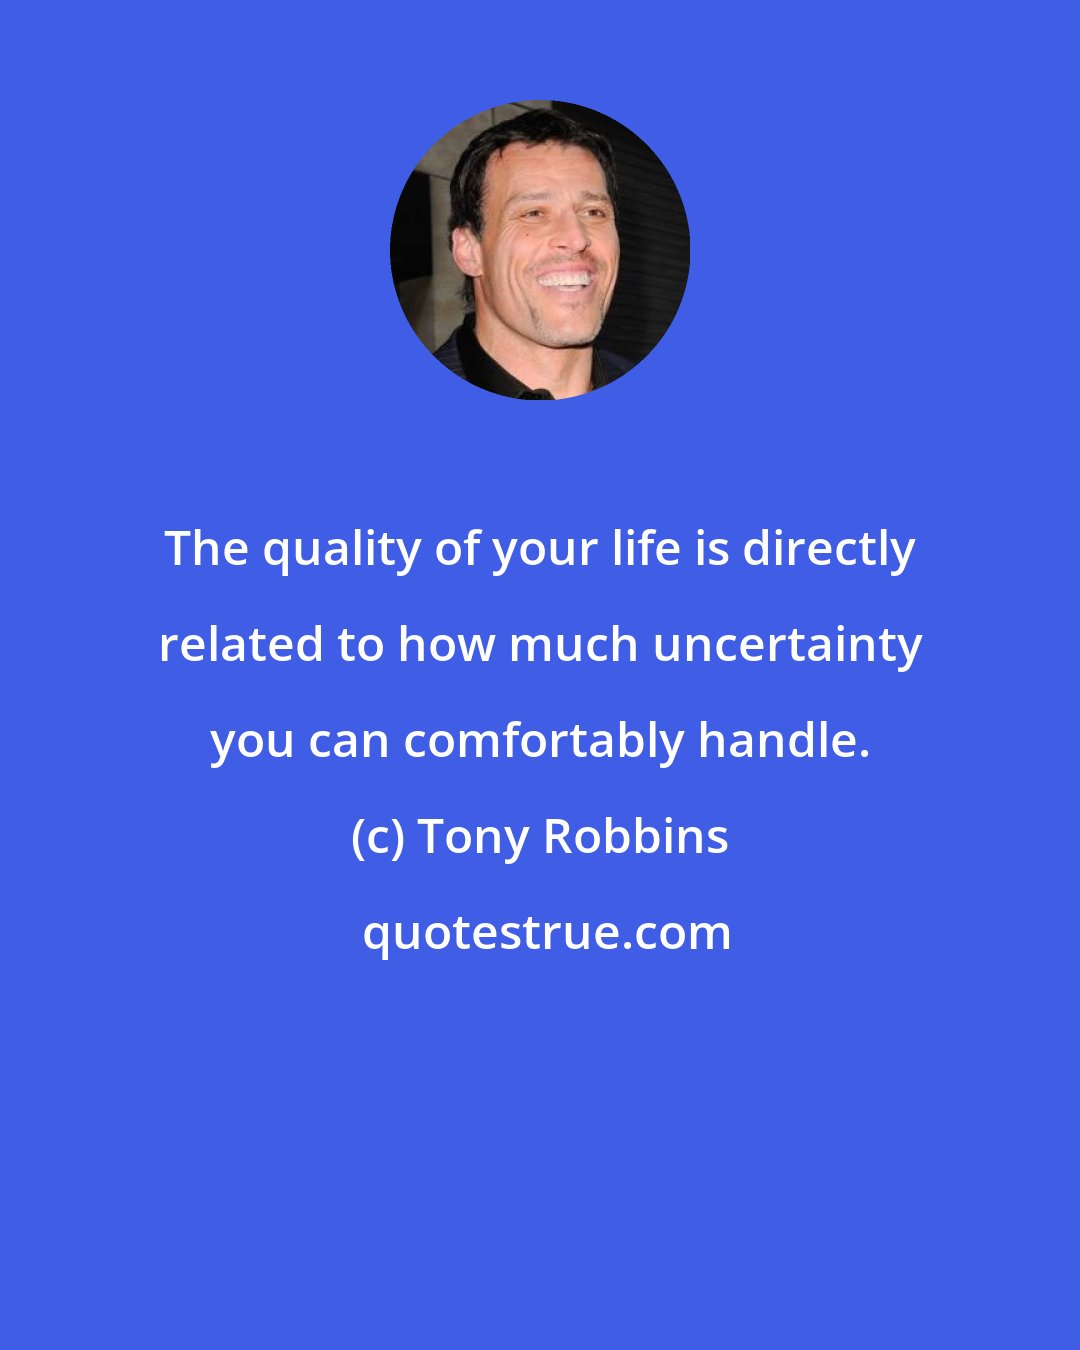 Tony Robbins: The quality of your life is directly related to how much uncertainty you can comfortably handle.